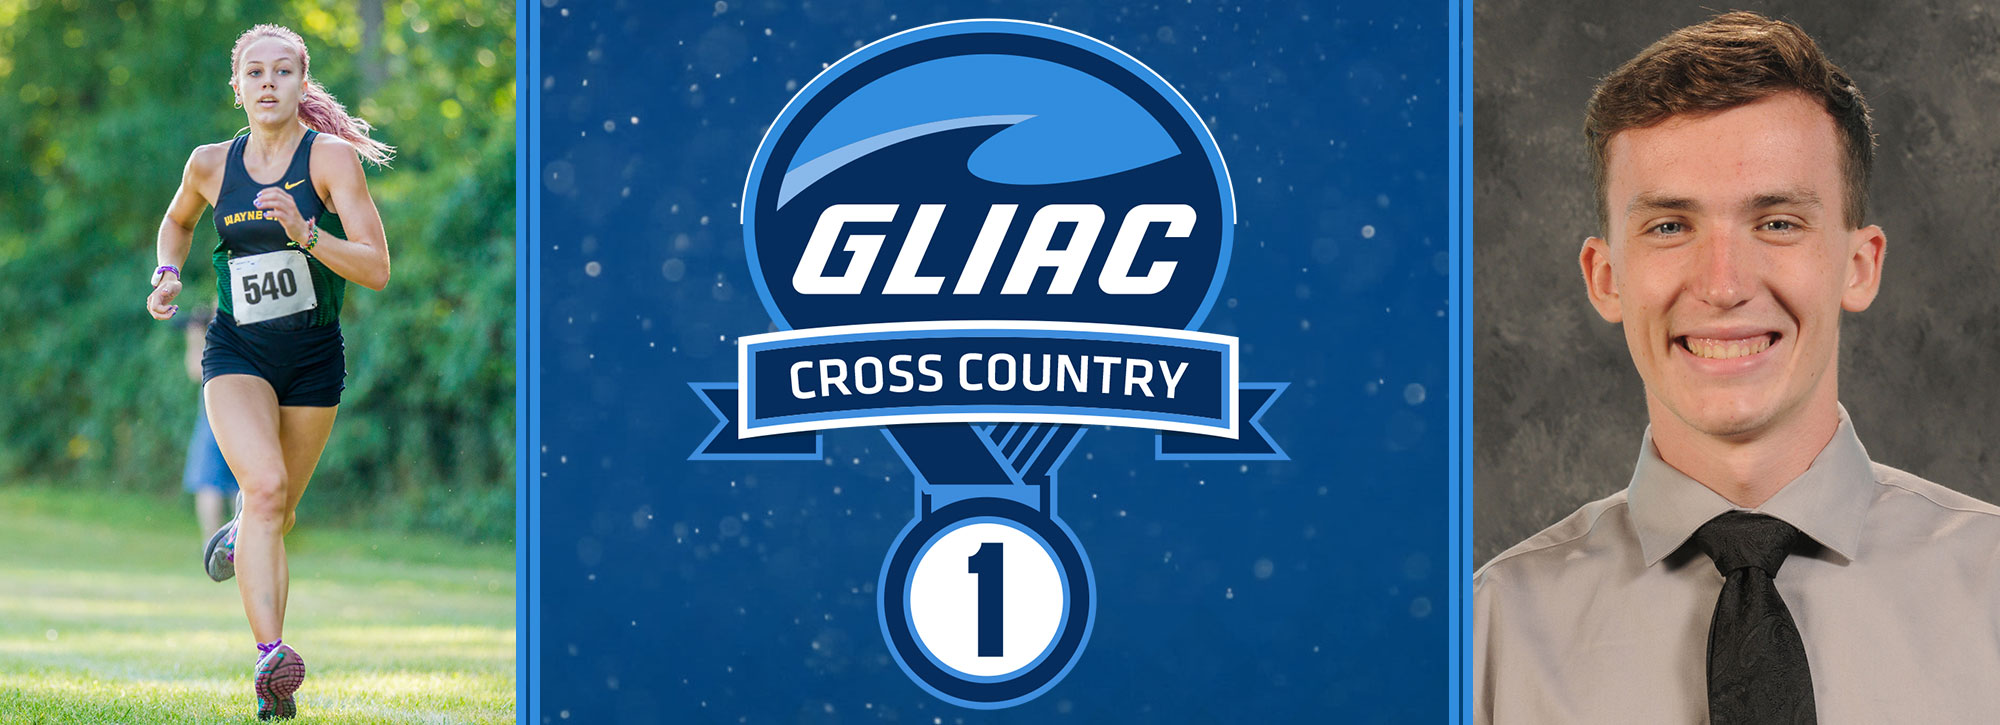 Wayne State's Byrnes & Defrain Sweep GLIAC Cross Country Athlete of the Week Accolades